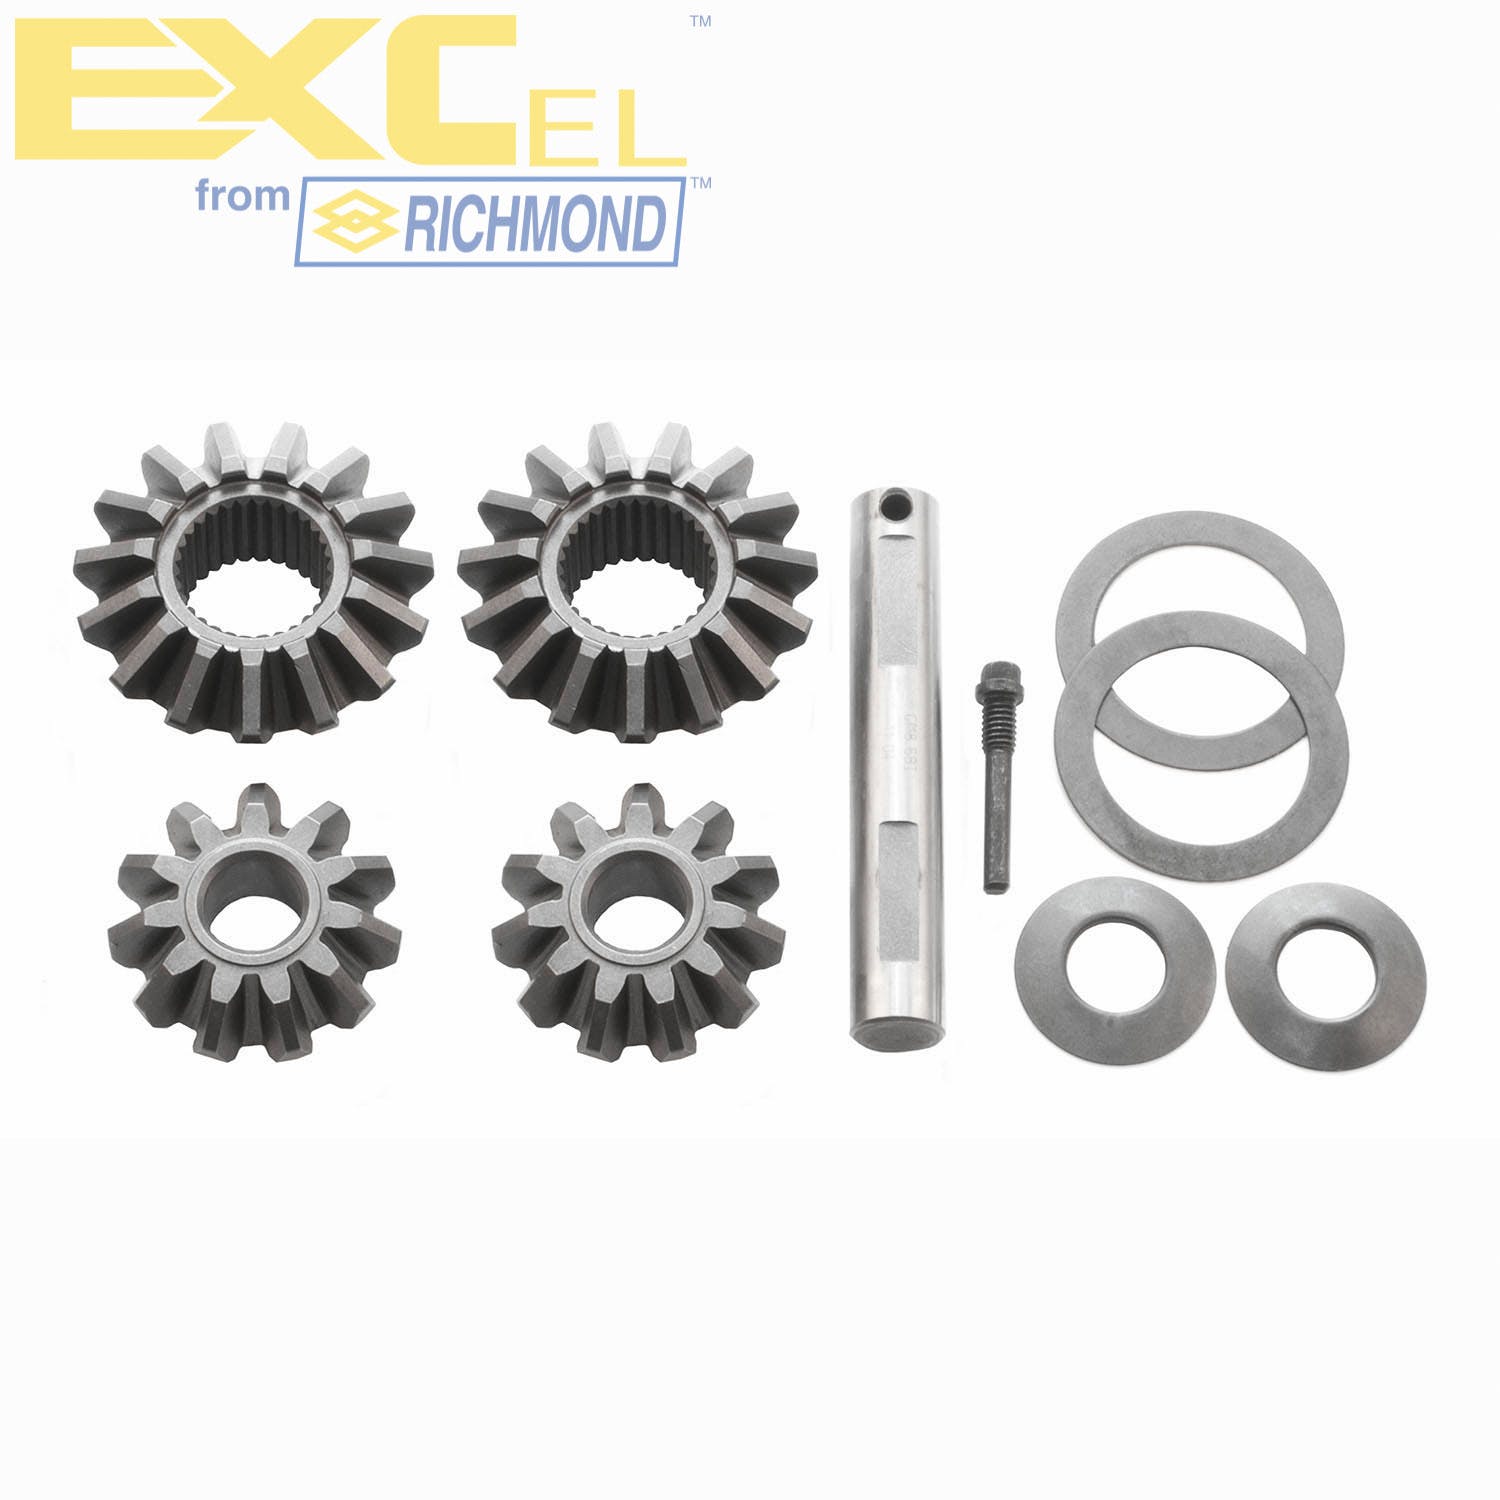 Excel XL-4052 Differential Carrier Gear Kit